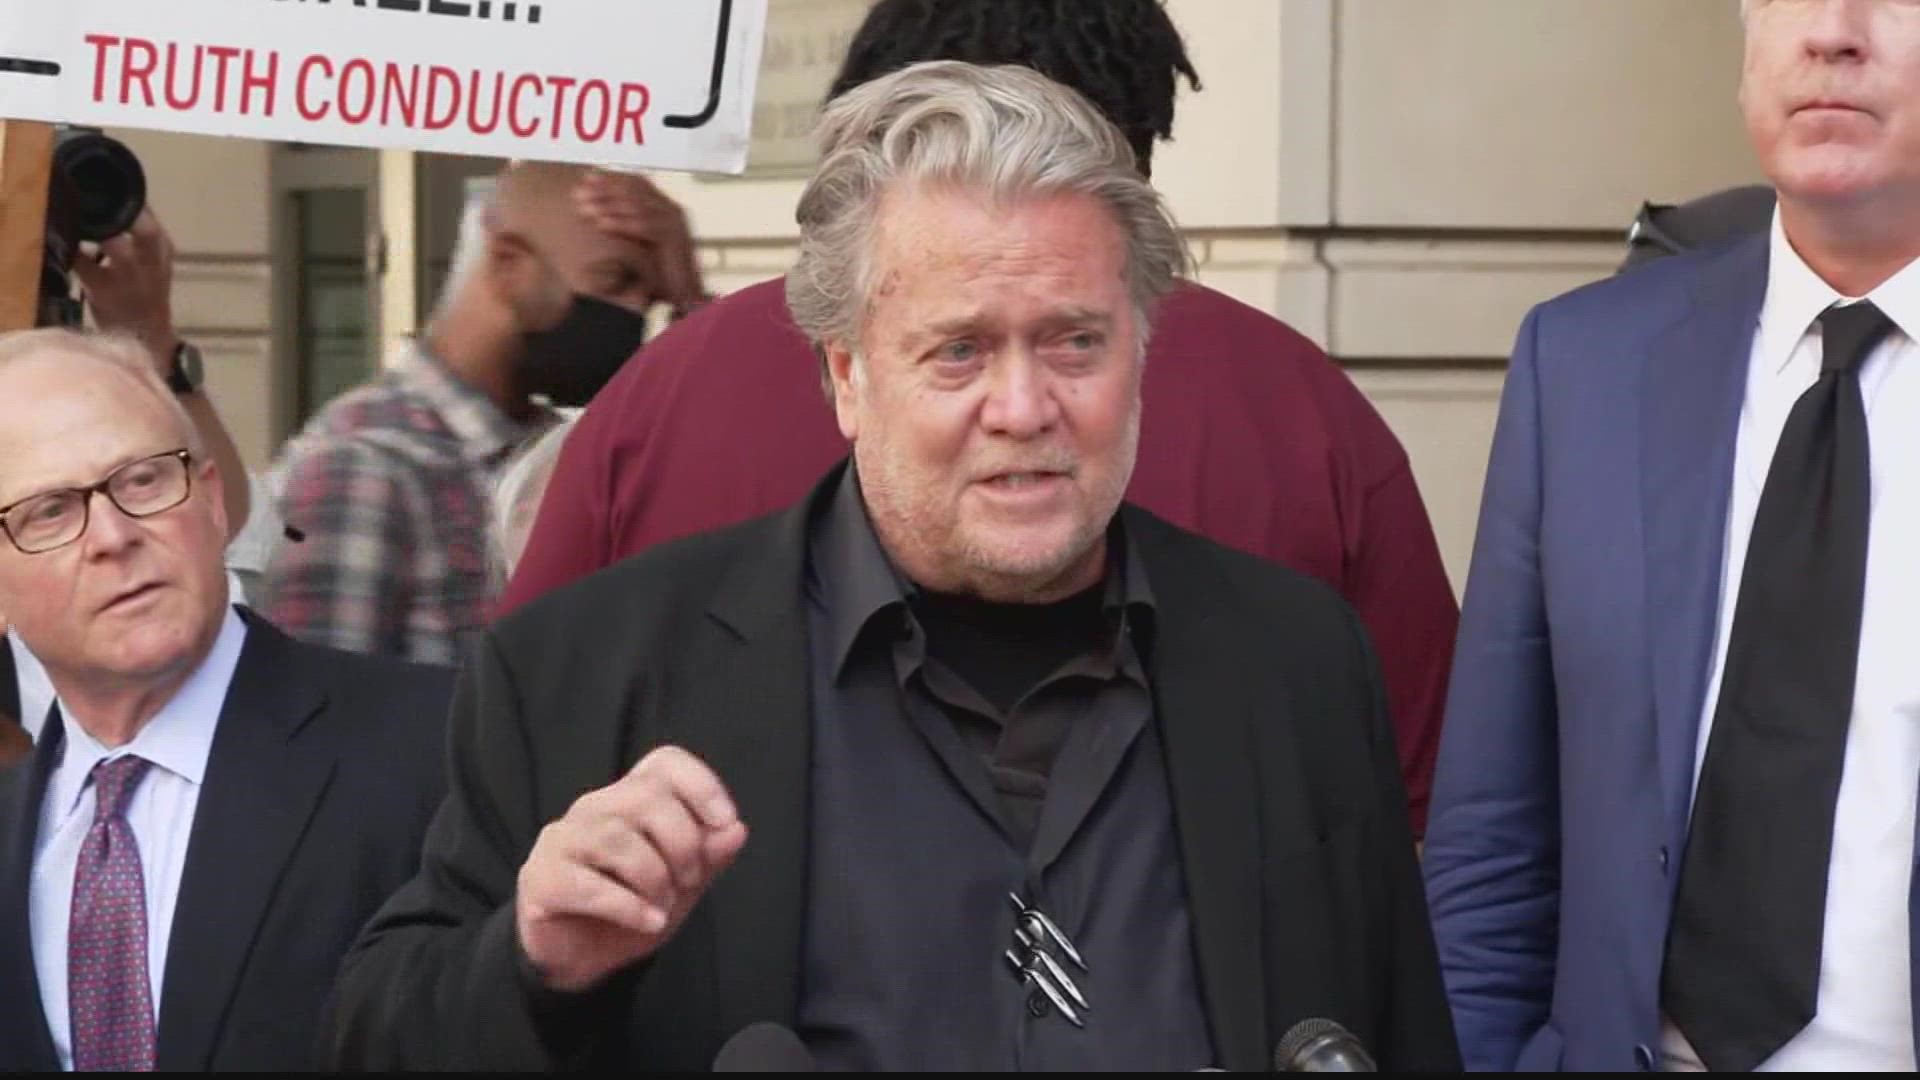 Jessica Denson wants a D.C. judge to hold Bannon in civil contempt for failing to respond to a subpoena served on video at his home.